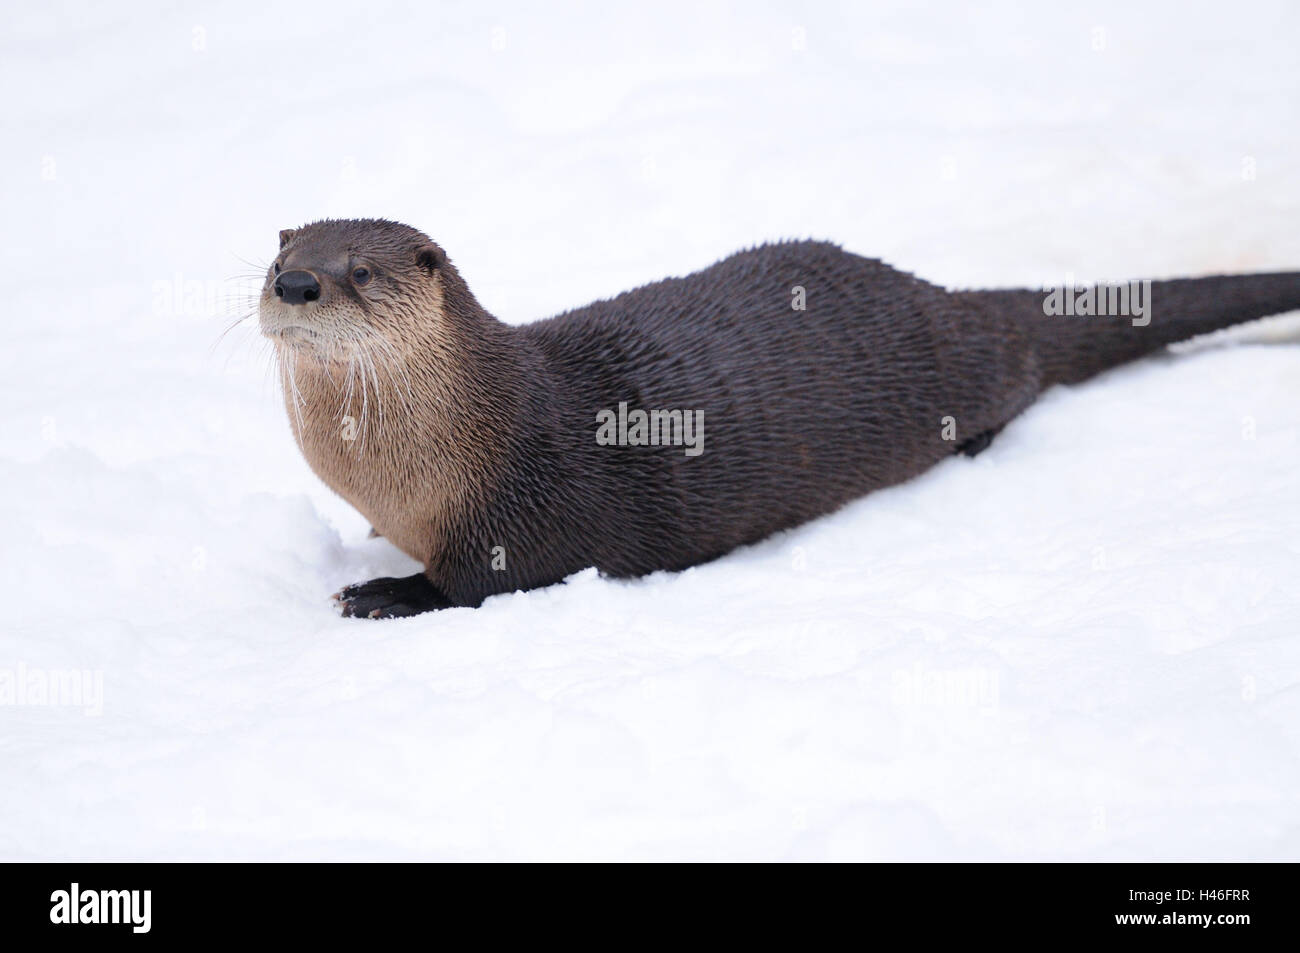 North American river otter, Lontra canadensis, Stock Photo